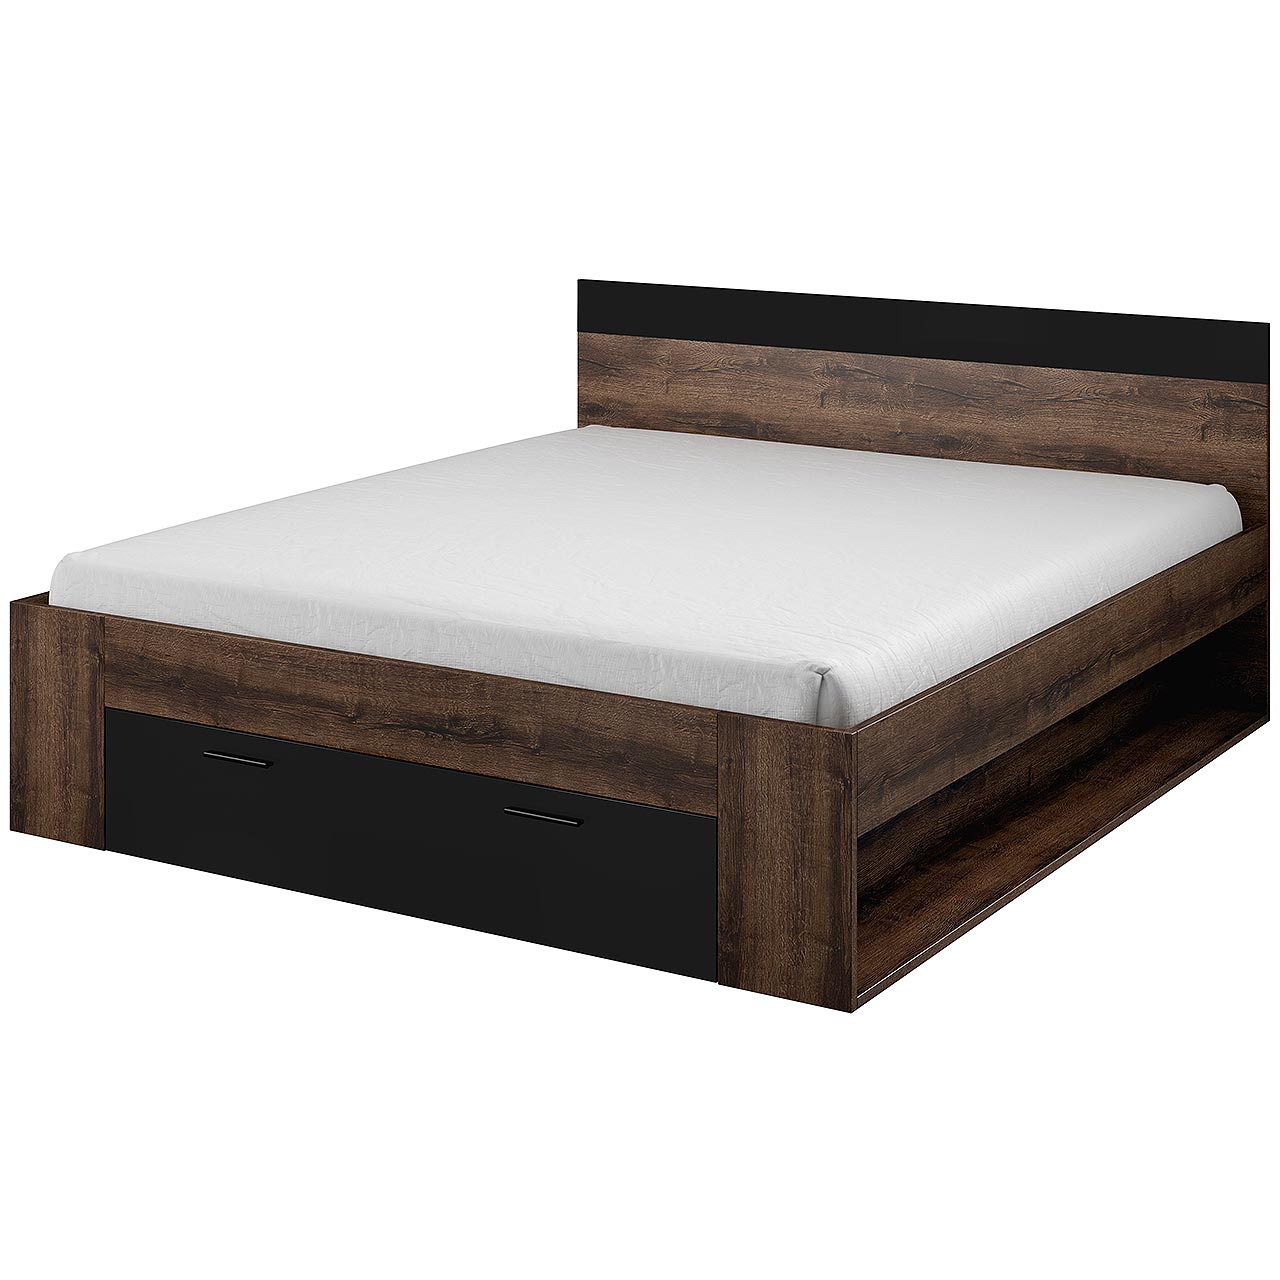 Bed with drawers 160x200 BETA BE91 monastery oak / black